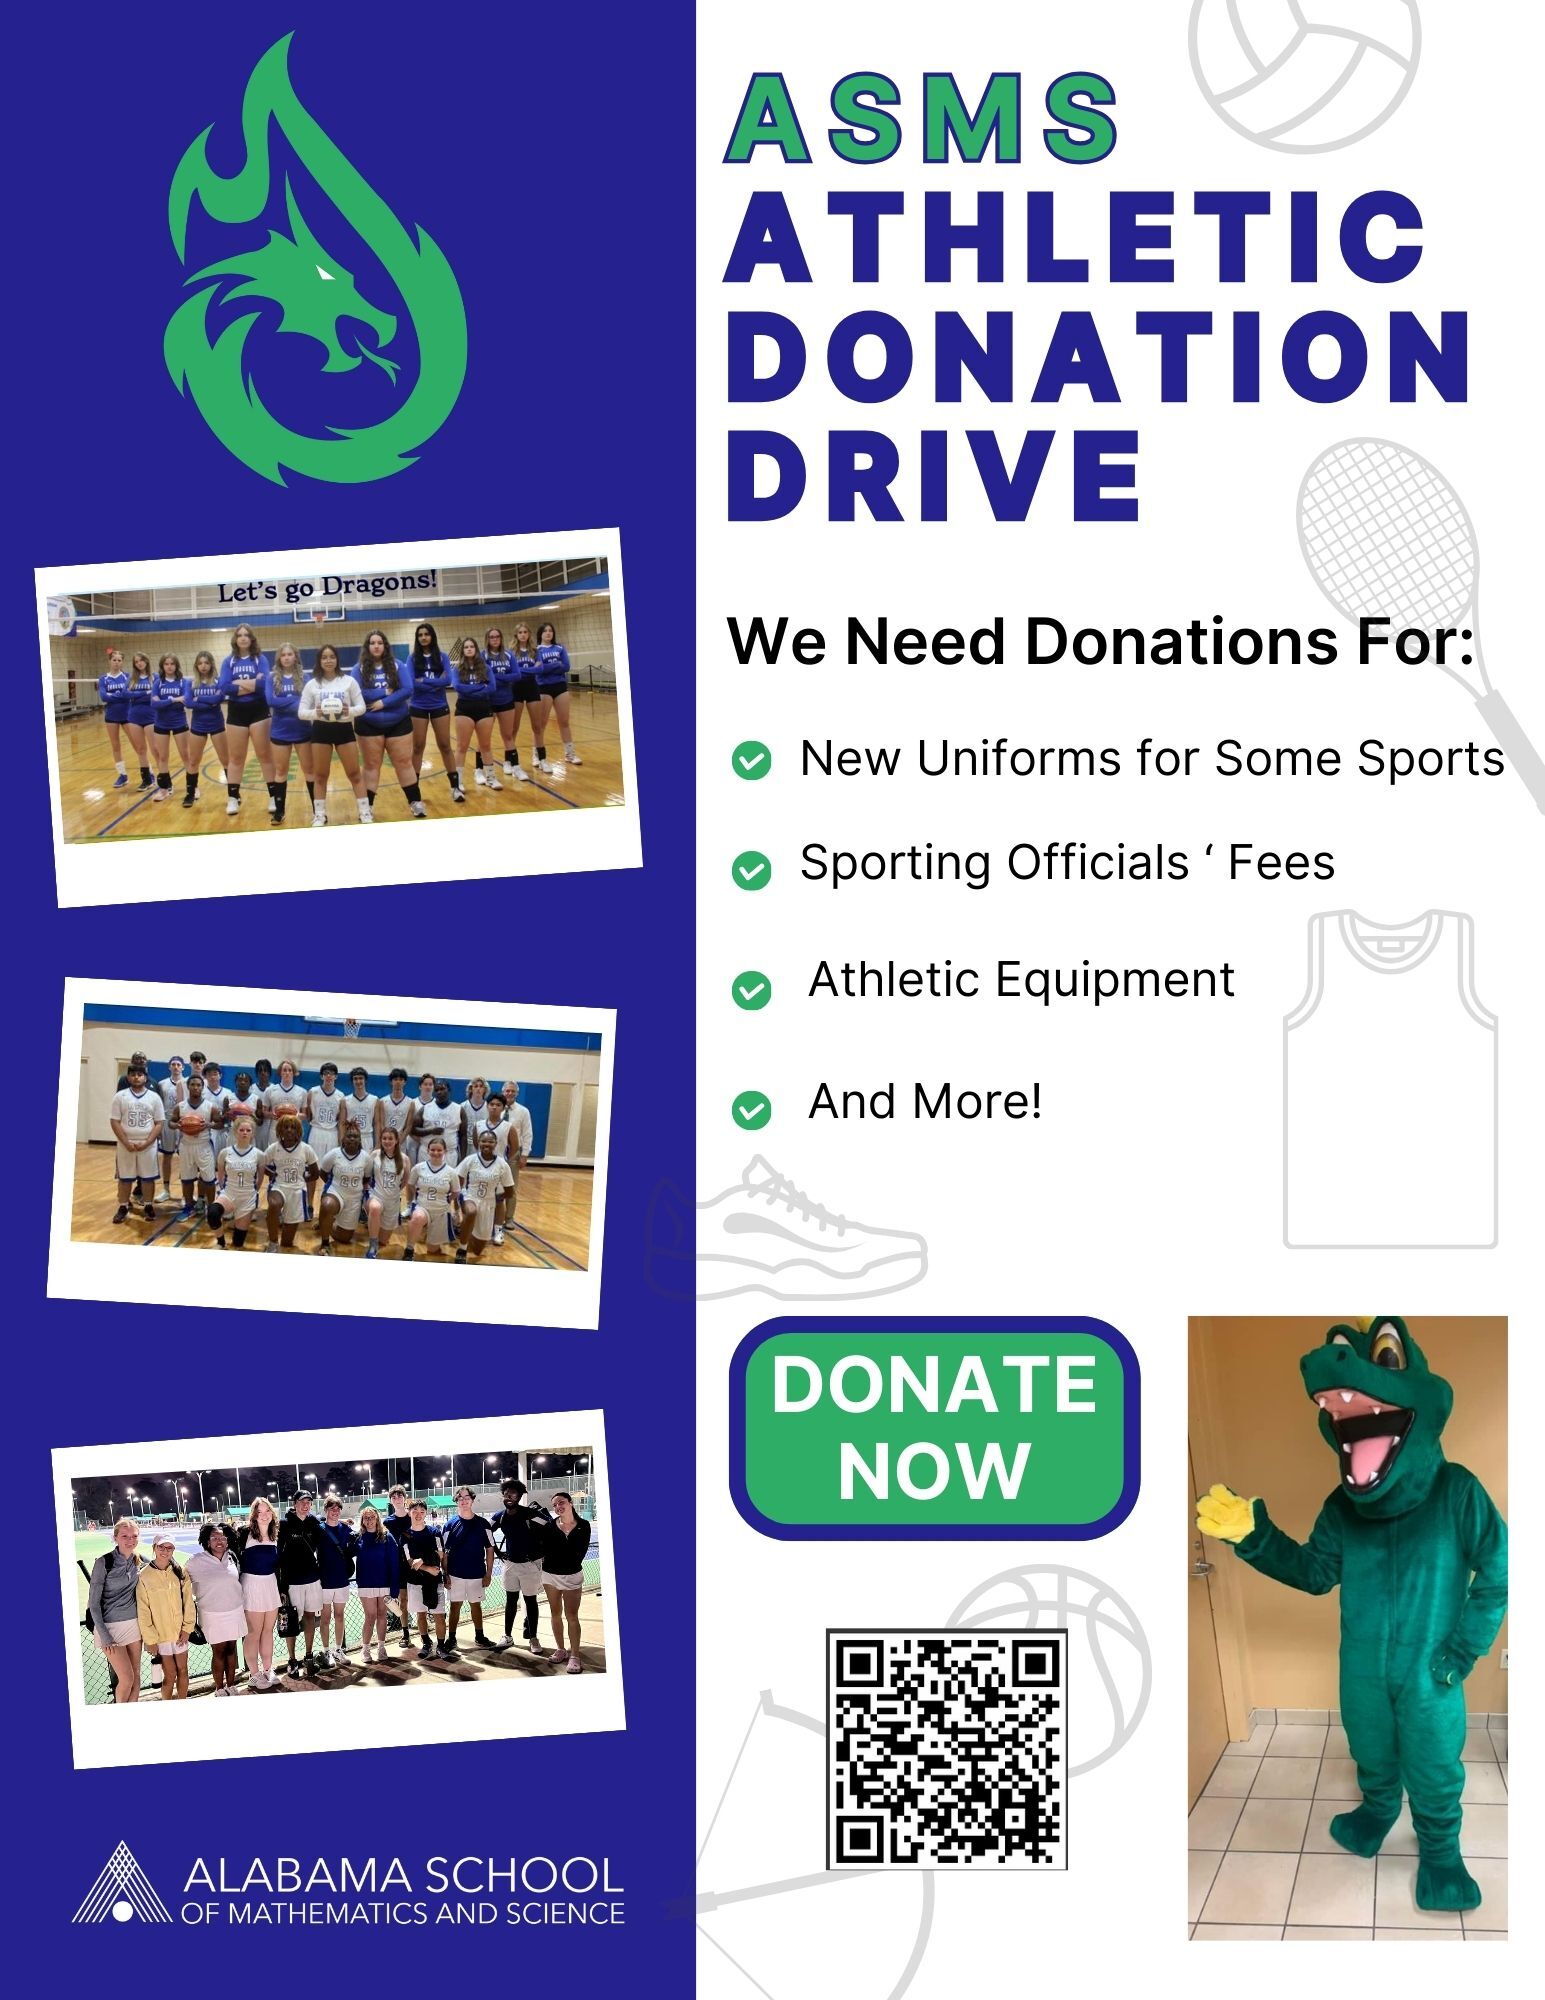 Help us give the gift of fitness Make a donation to help us fund the need for some new athletic uniforms